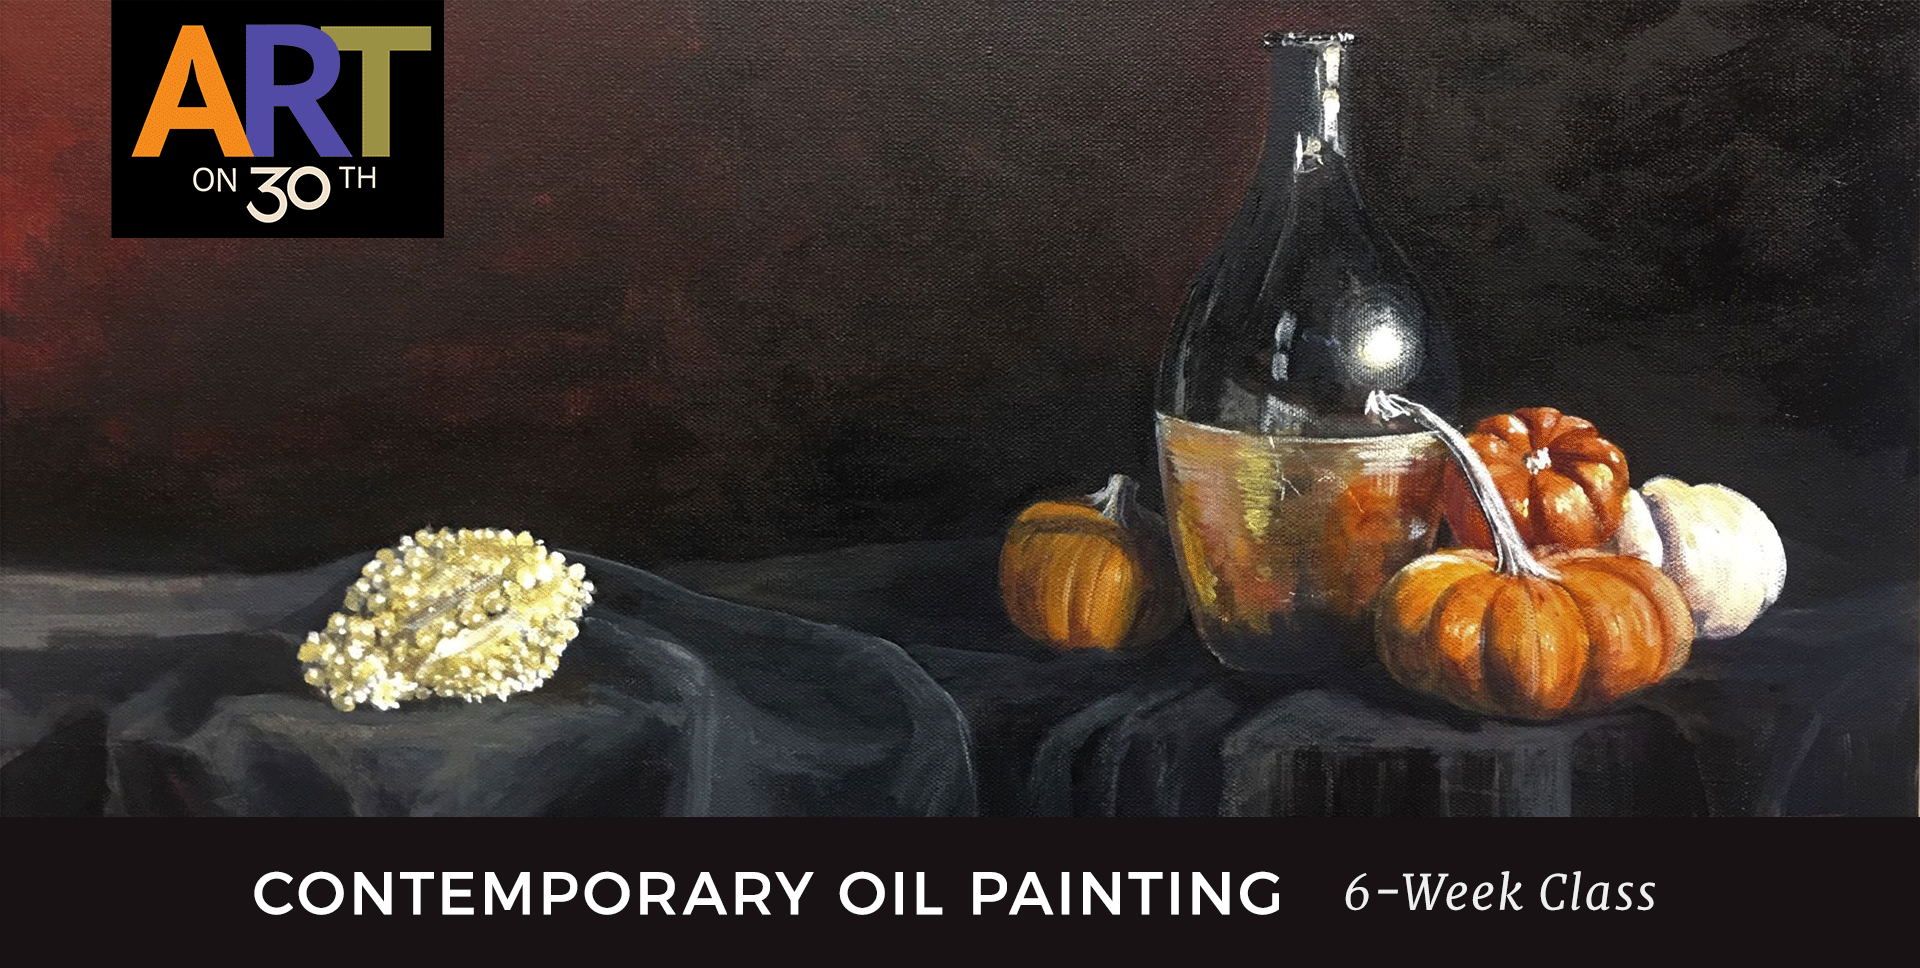 TUE - Contemporary Oil Painting with instructor Duke Windsor